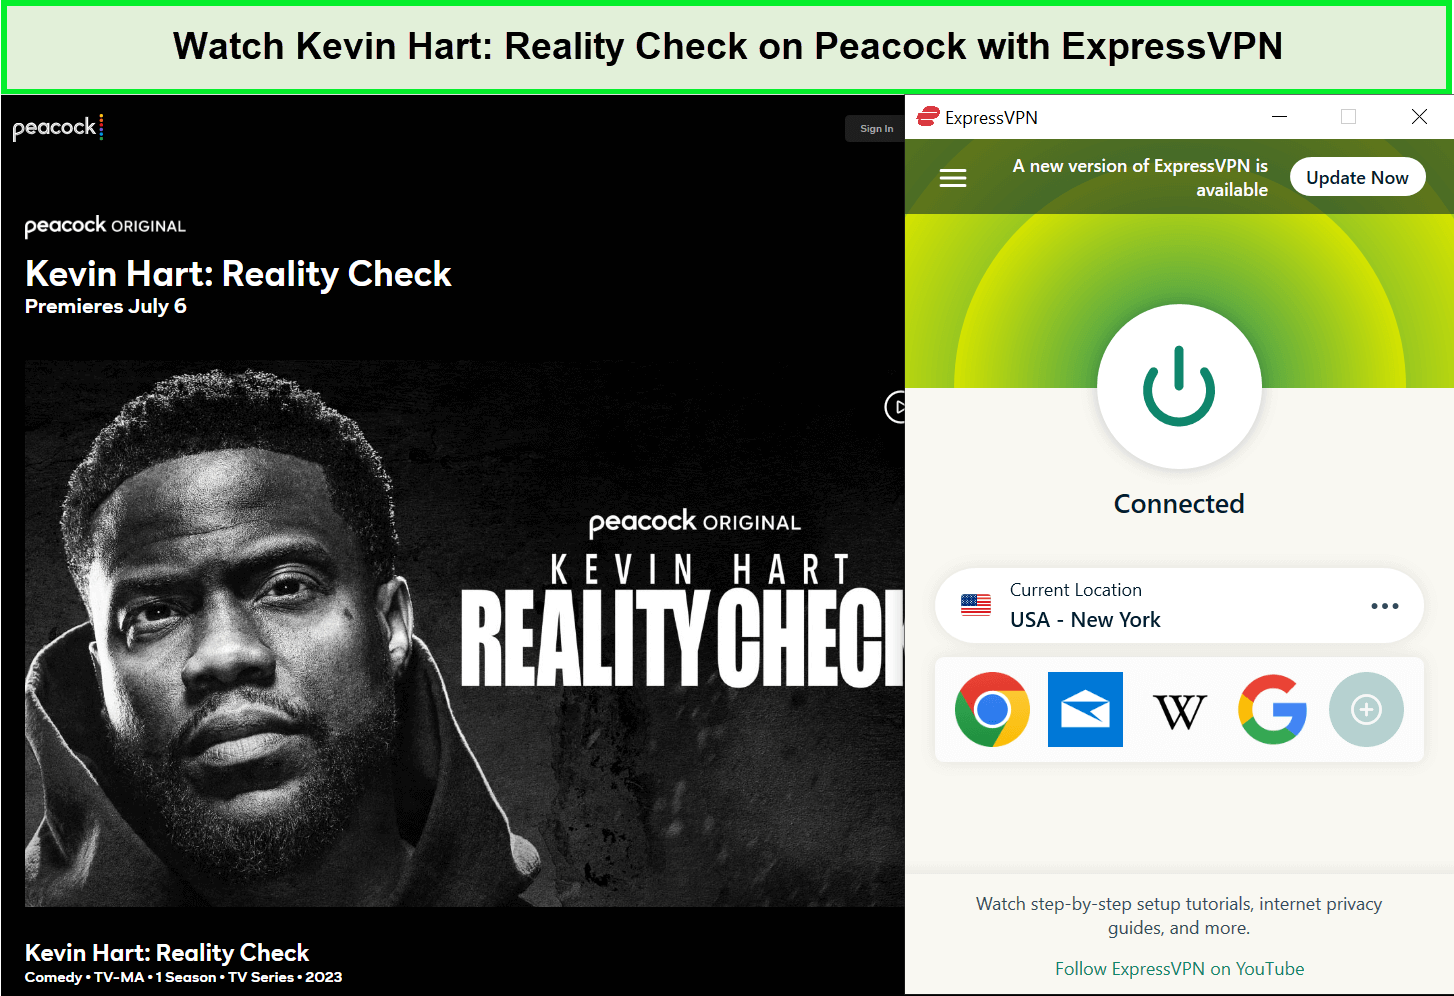 Watch-Kevin-Hart-Reality-Check-in-France-on-Peacock-with-ExpressVPN